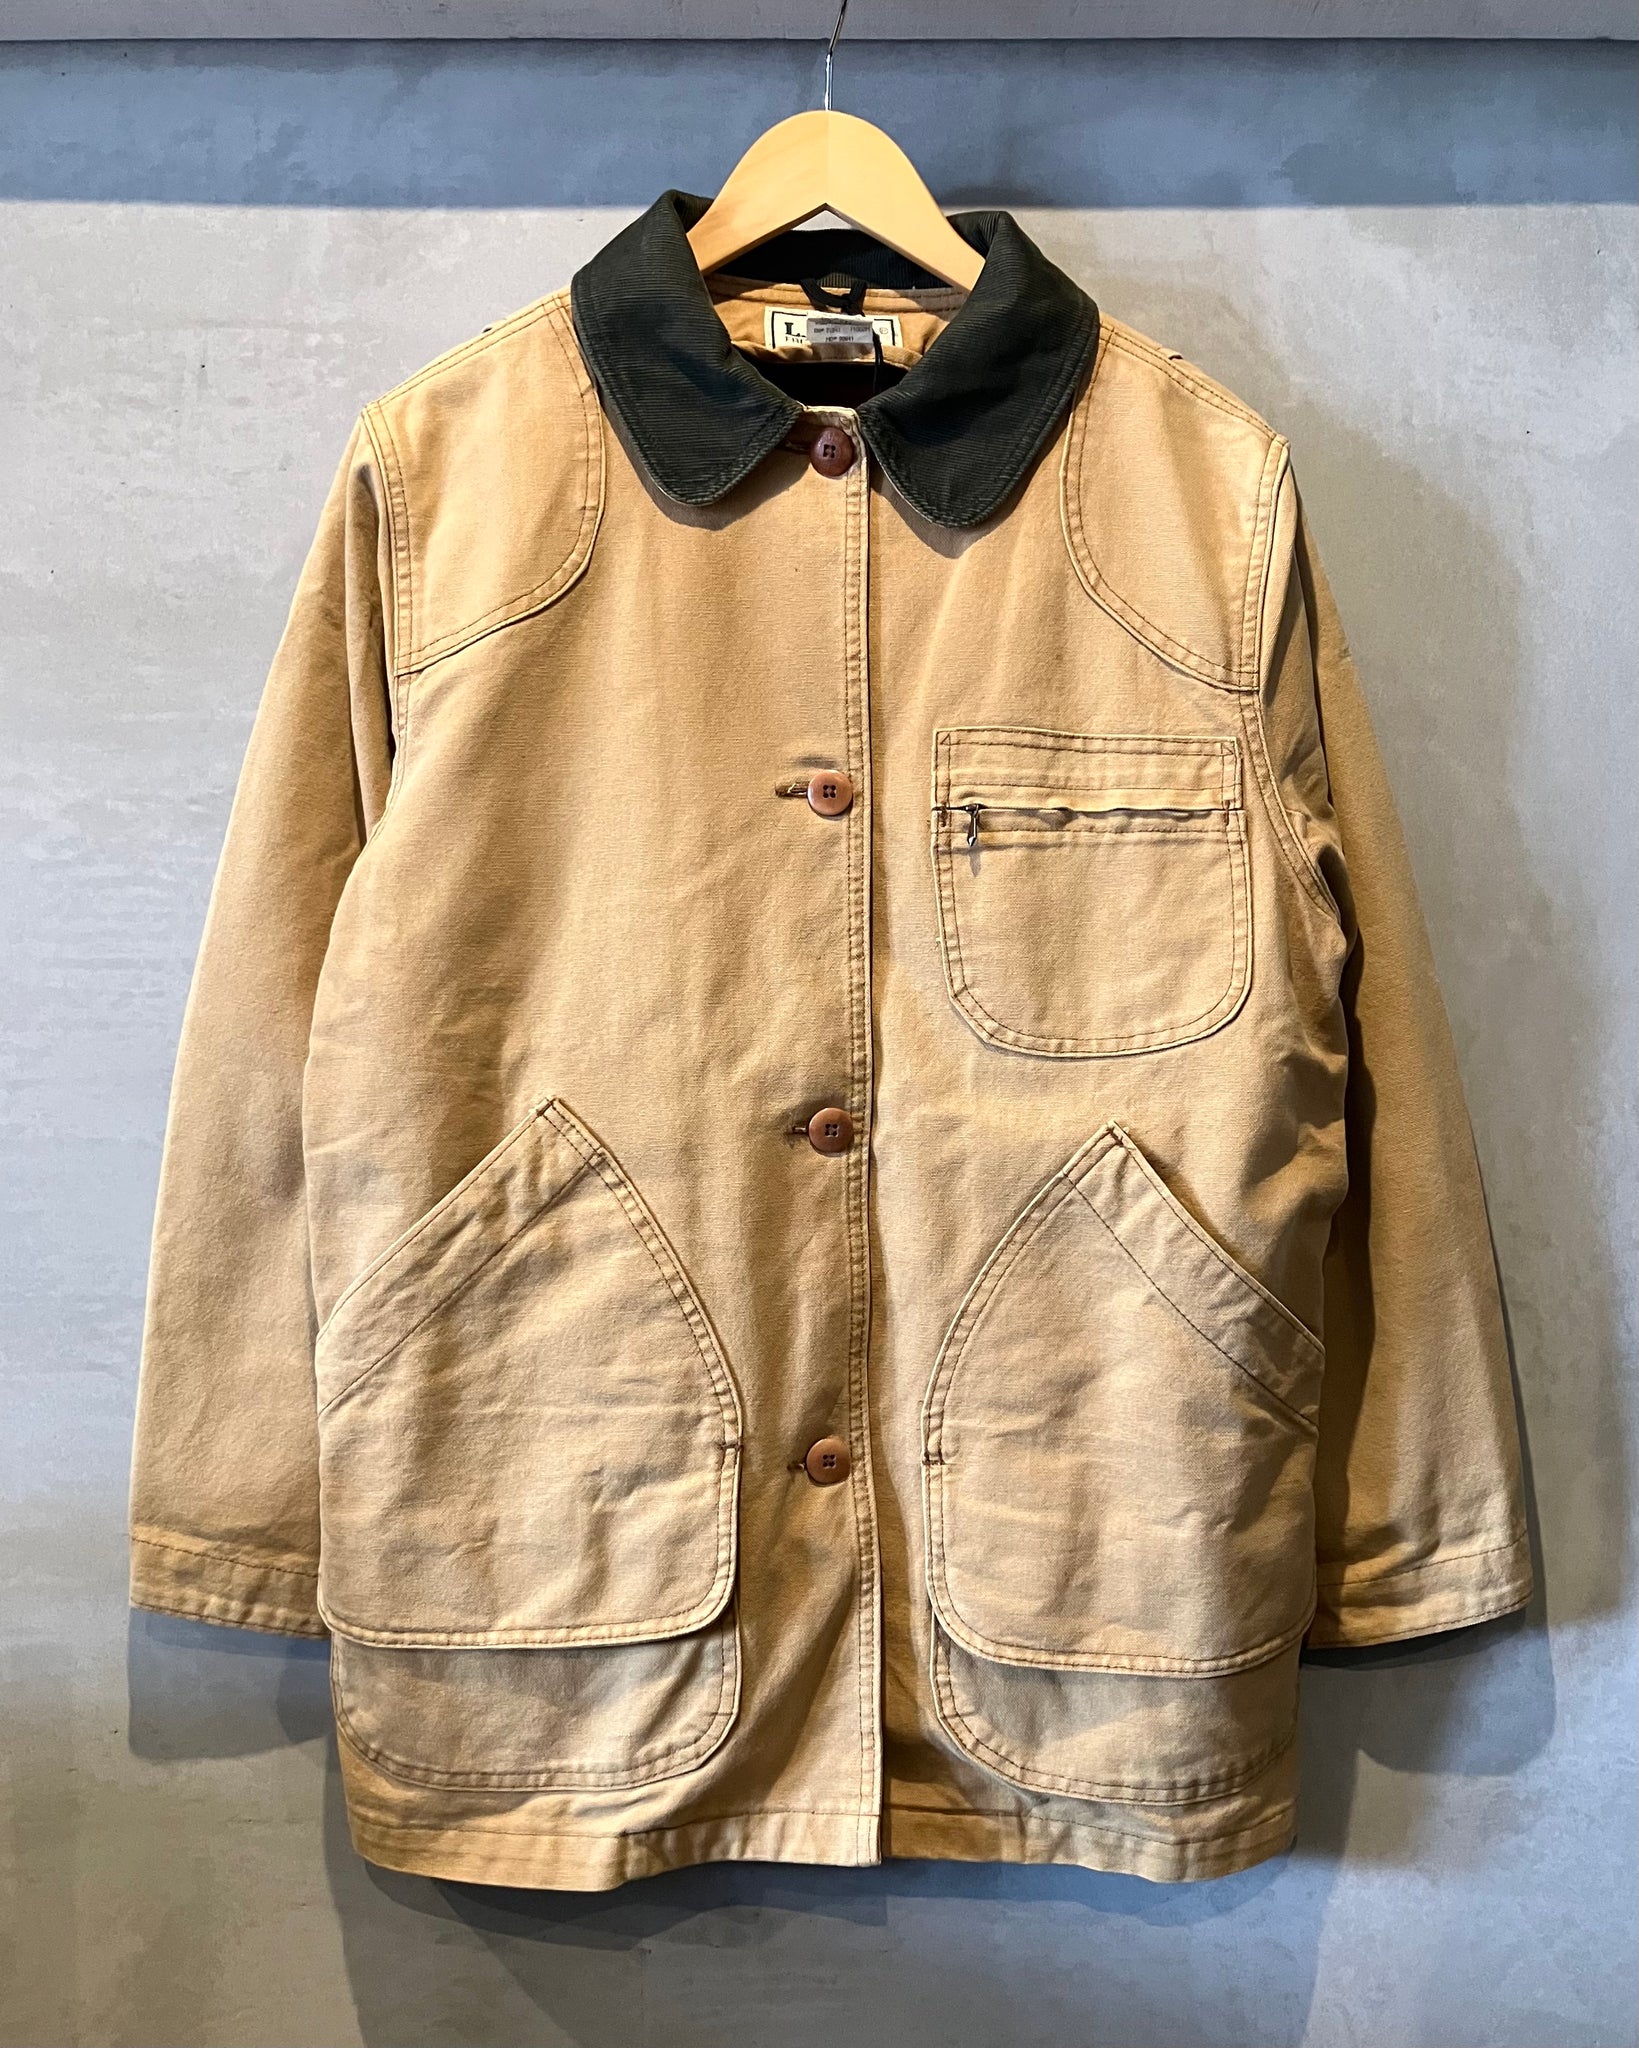 70 〜80's L.L.Bean-Hunting jacket-(Lady's size M)Made in U.S.A.